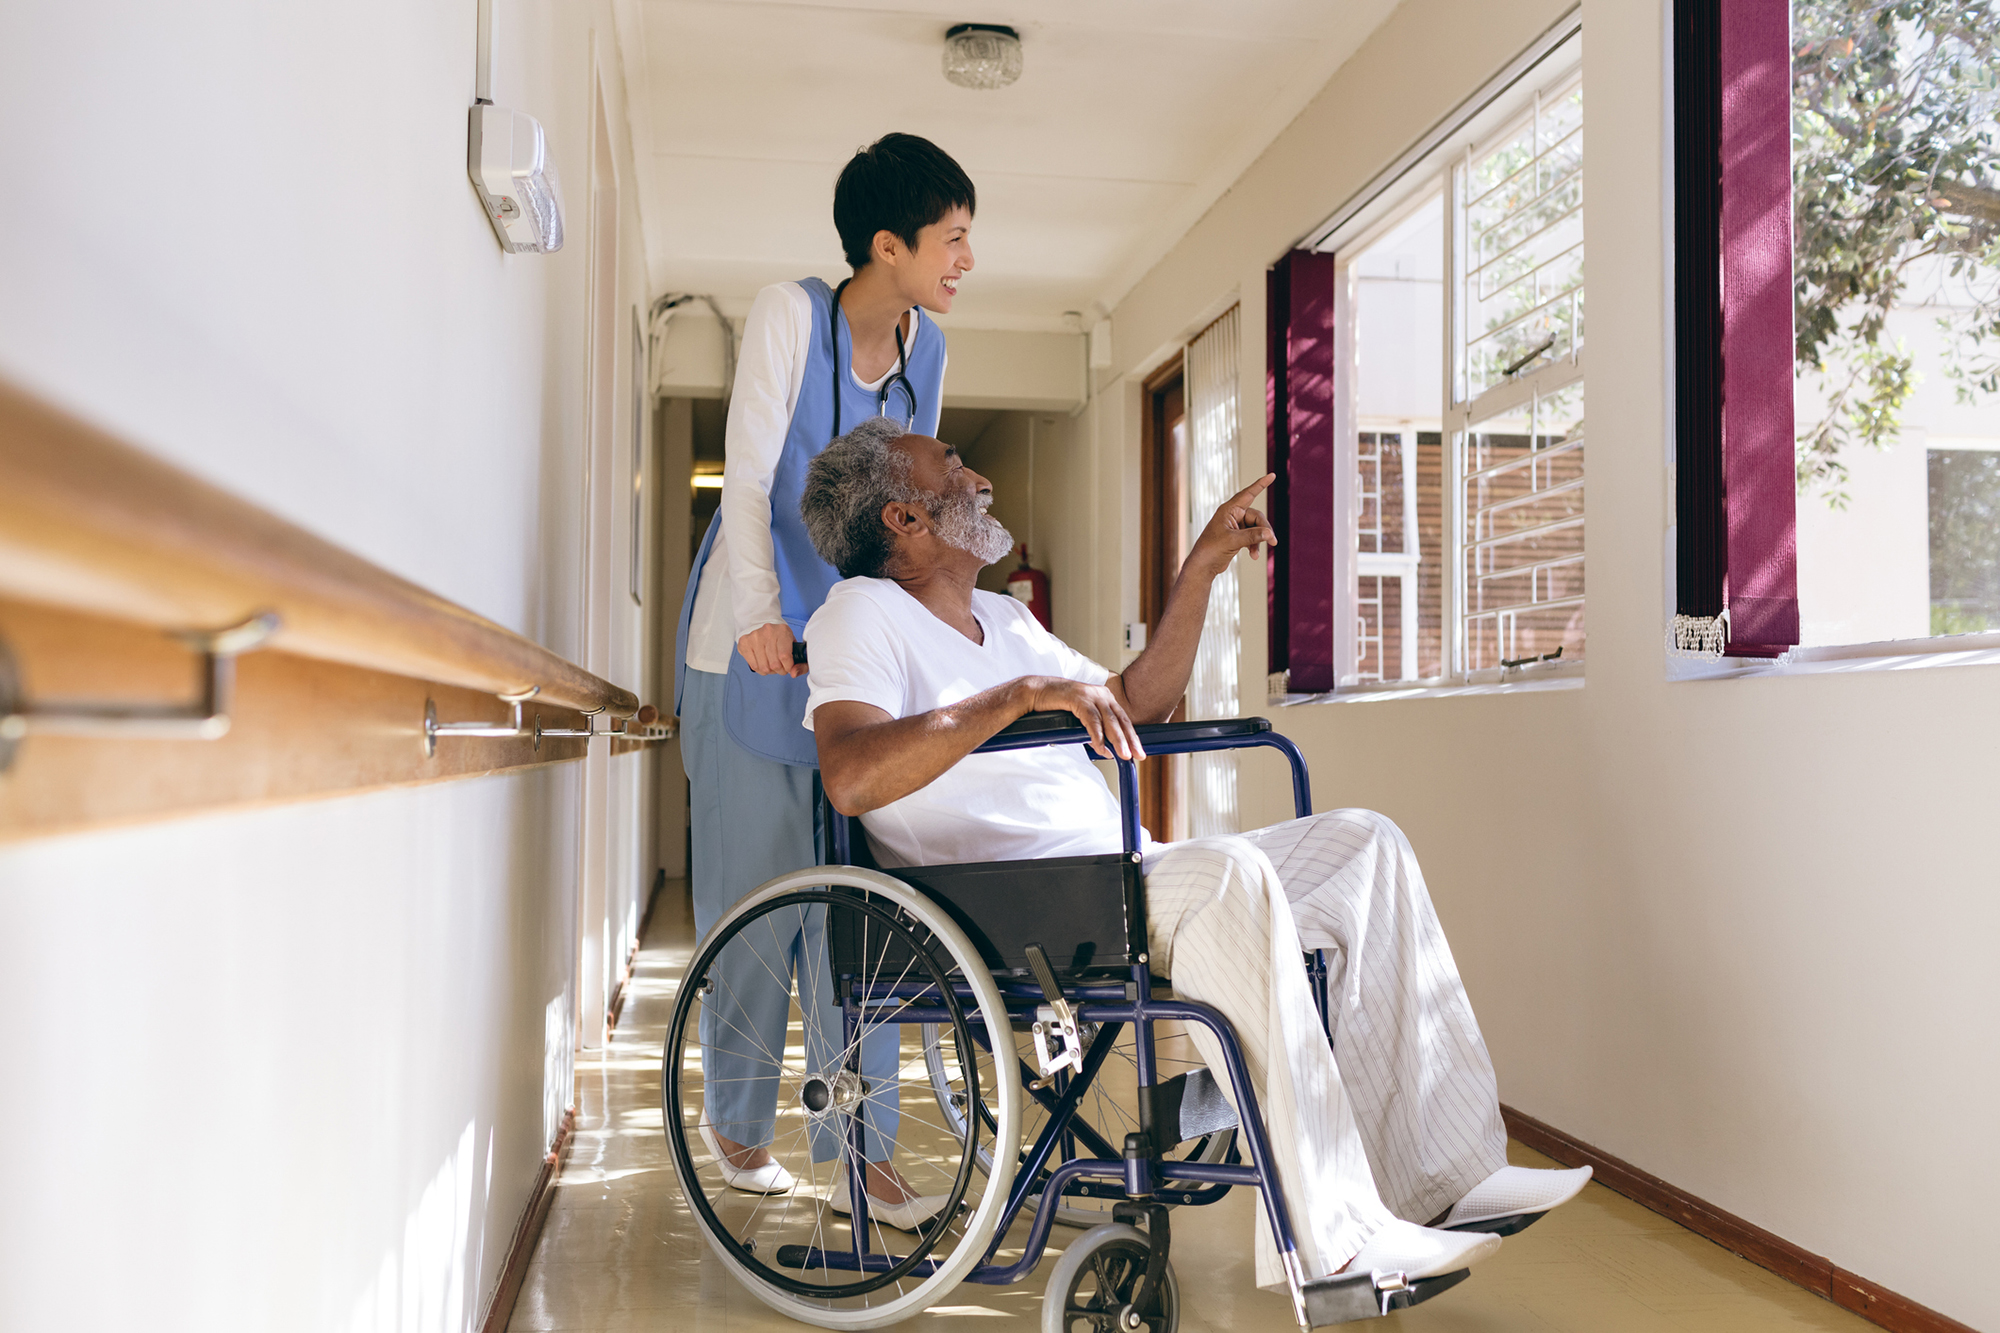 A nursing home worker pushing a patient in a wheelchair.